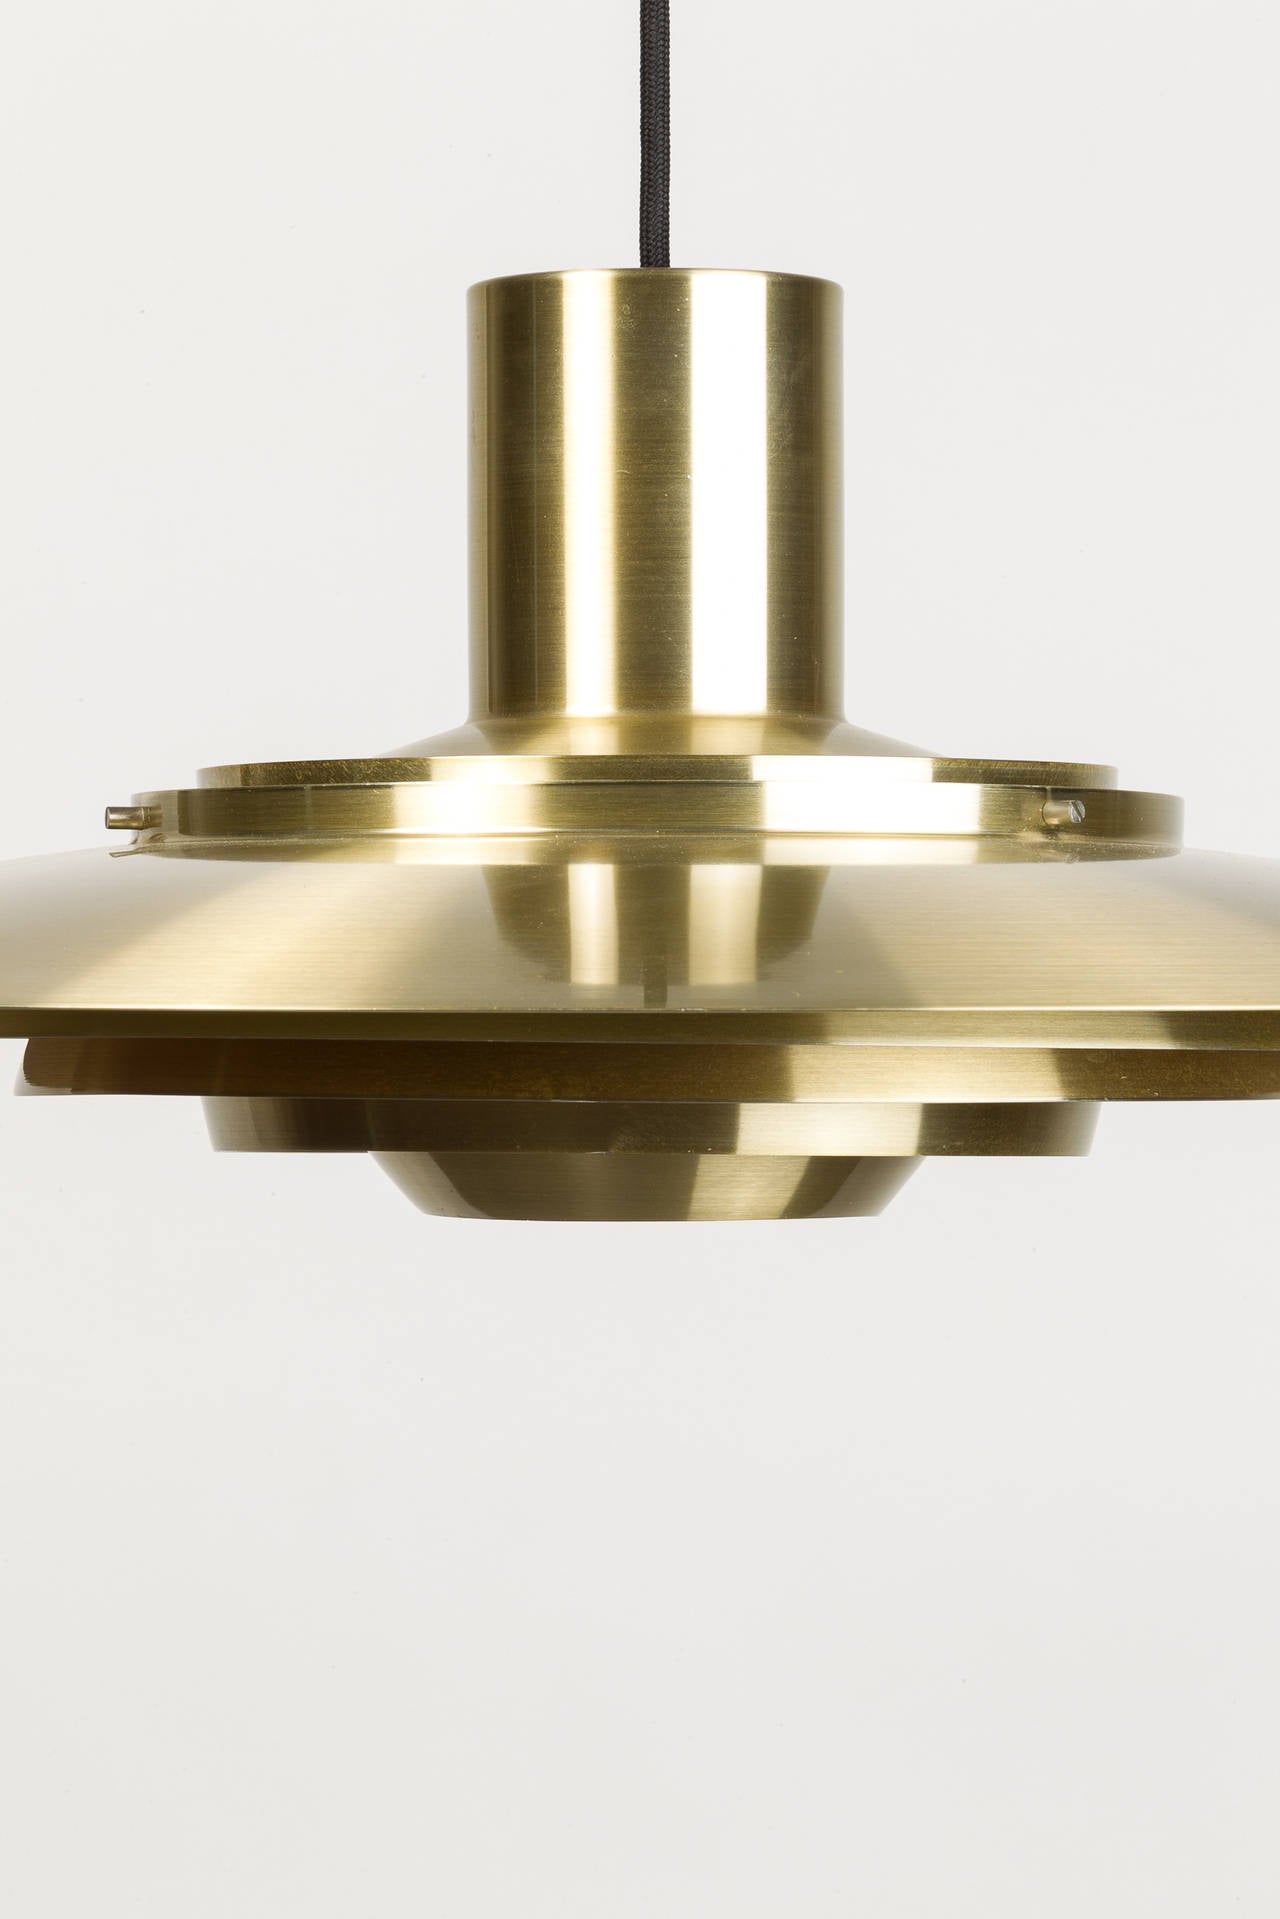 Medium-sized Fabricius & Kastholm pendant, brass plated. Model P 376, designed in 1964, manufactured by Nordisk Solar in Denmark. Spends a very warm light because the inside of the discs is also golden toned.